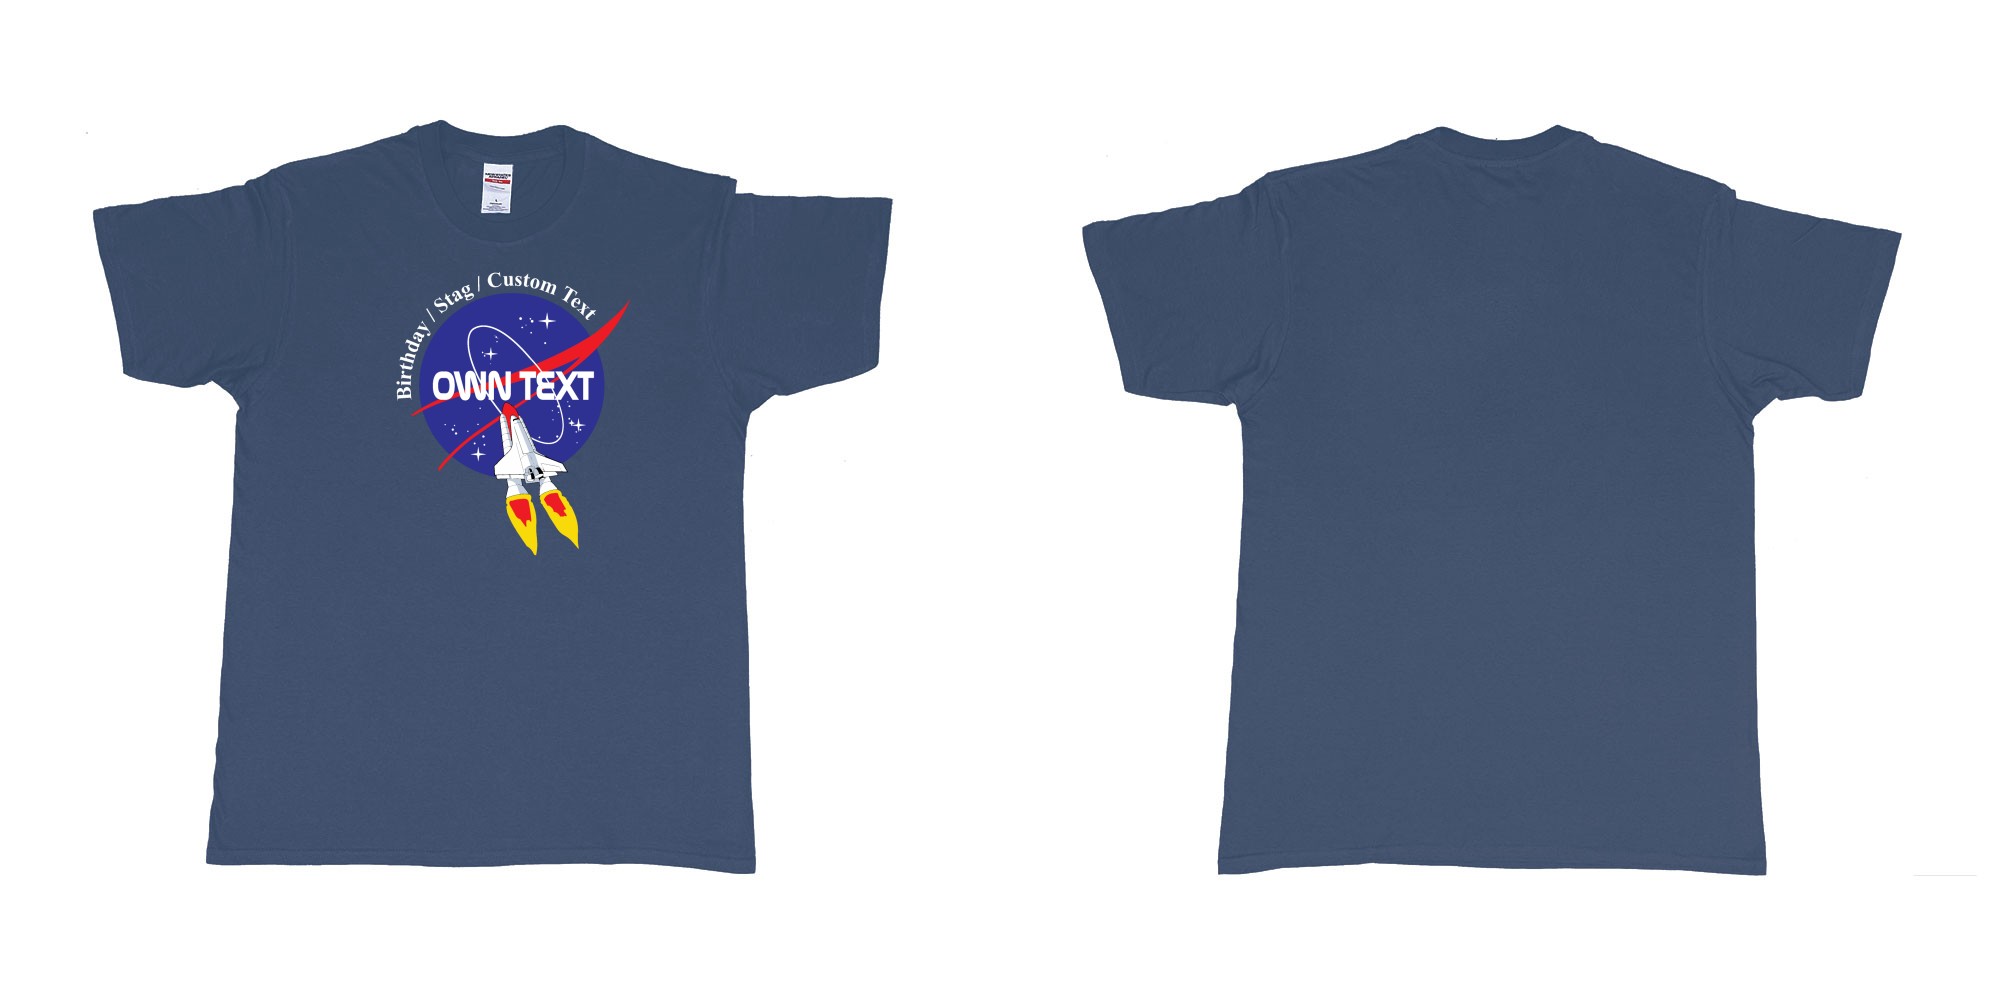 Custom tshirt design nasa logo rocket custom text print in fabric color navy choice your own text made in Bali by The Pirate Way